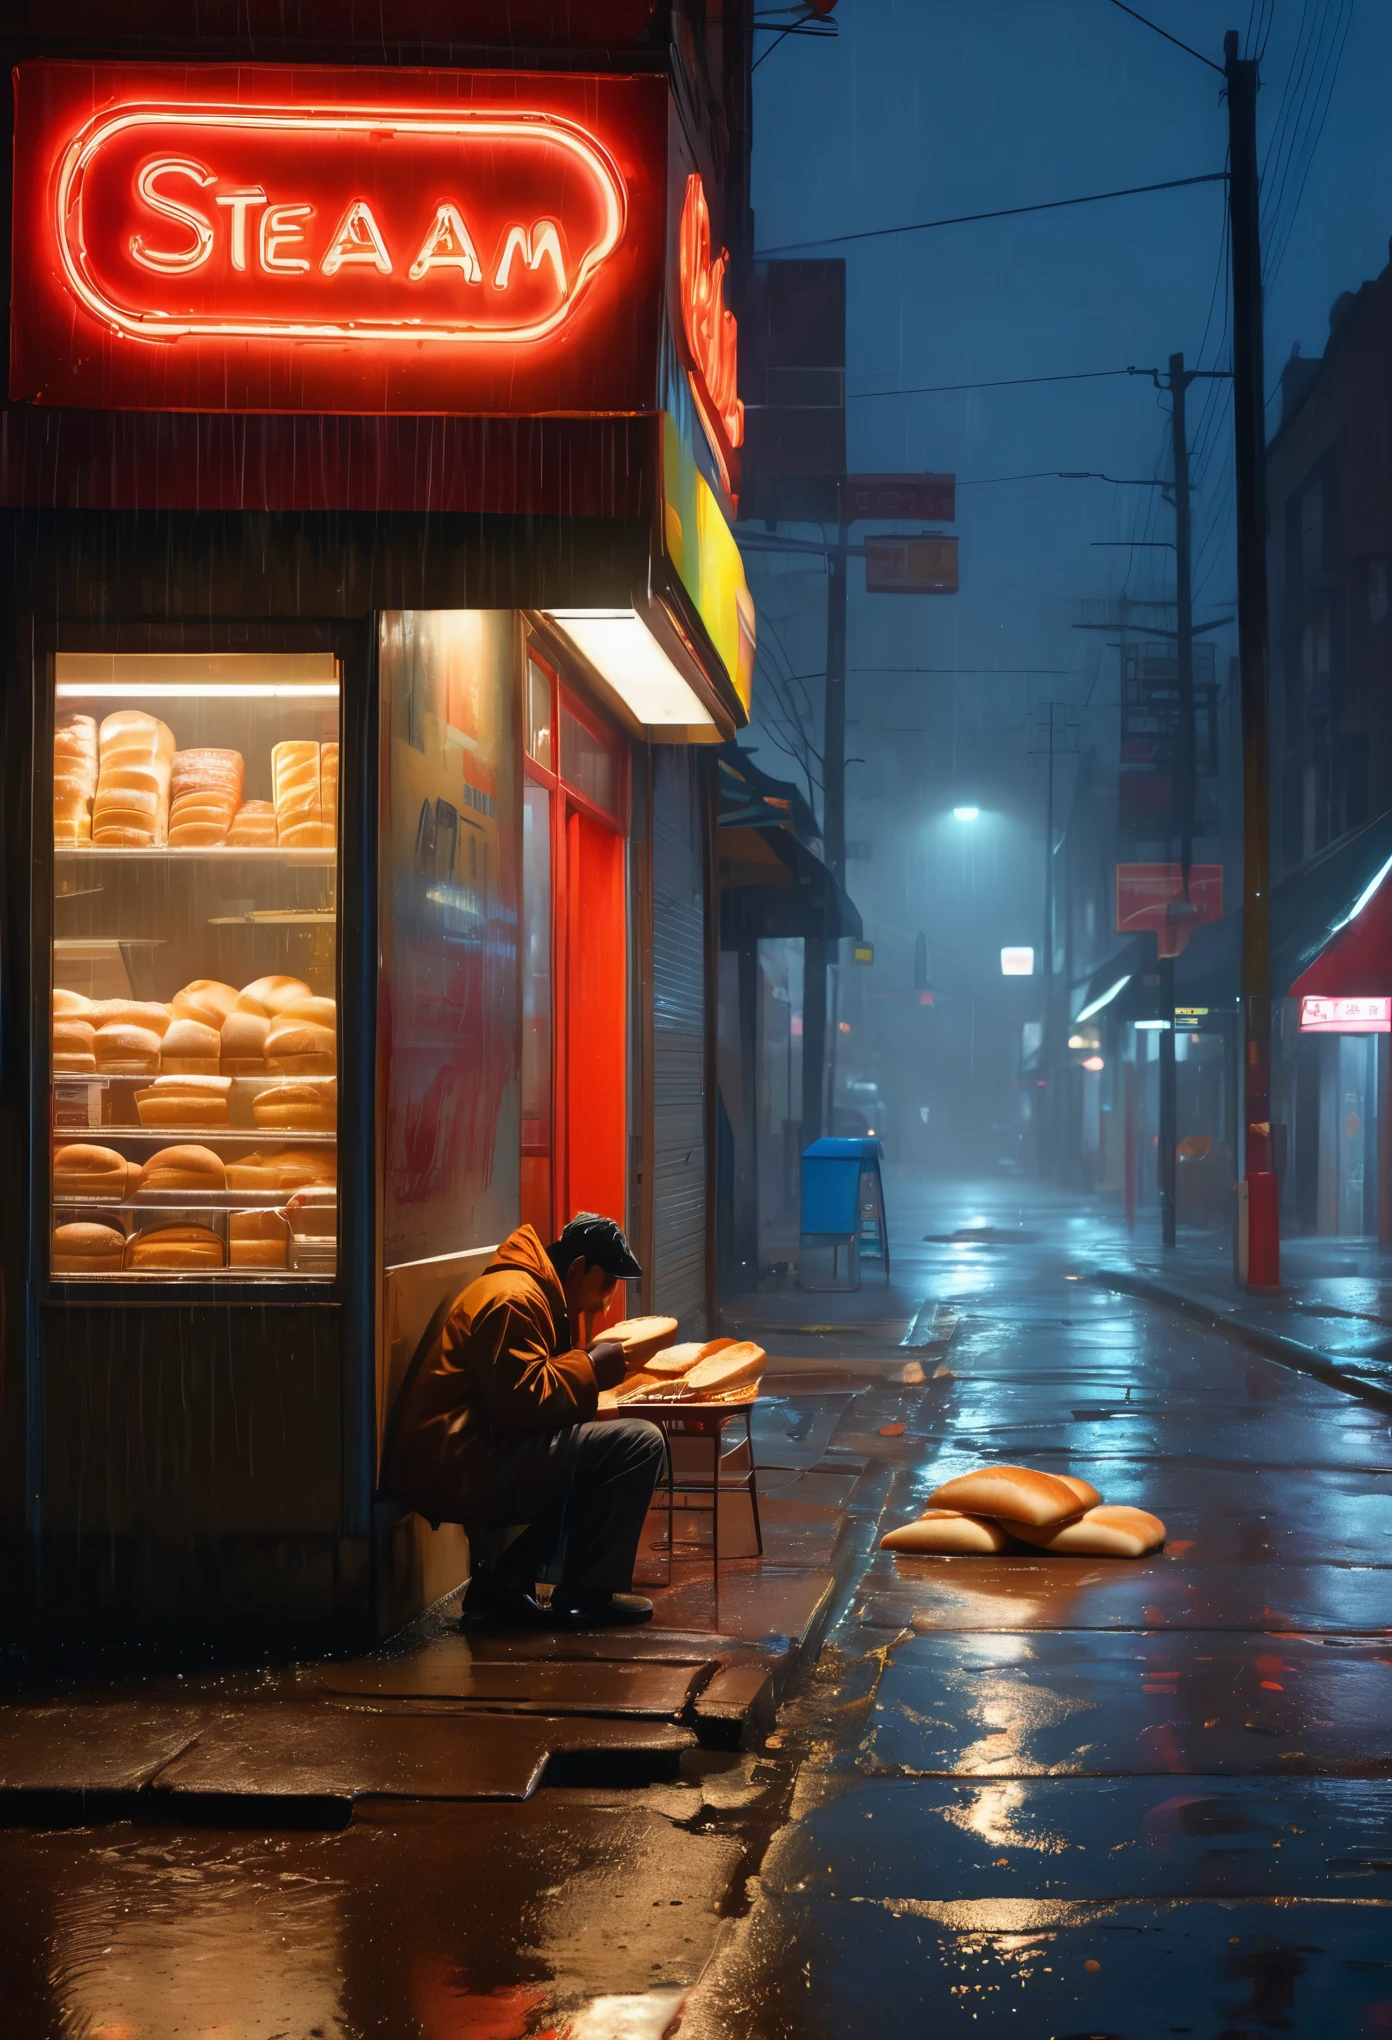 (best quality,ultra-detailed,realistic:1.37),a worker eating bread, squatting outside a midnight convenience store, rain,foggy street,lit by dim streetlights,red neon signs,empty streets,moist pavement,reflection of neon lights,abandoned buildings, atmosphere,cold concrete walls,graffiti-covered store walls,dark clouds,blurred figures passing by,gentle raindrops,steam rising from the bread,crumbs falling off,weariness on the worker's face,steam rising from the drain,shadows cast by the streetlights,wet cardboard boxes,cracked asphalt,quietness broken by distant car sounds,smell of wet pavement,soft rain misting the air,flickering lights,desolate surroundings.